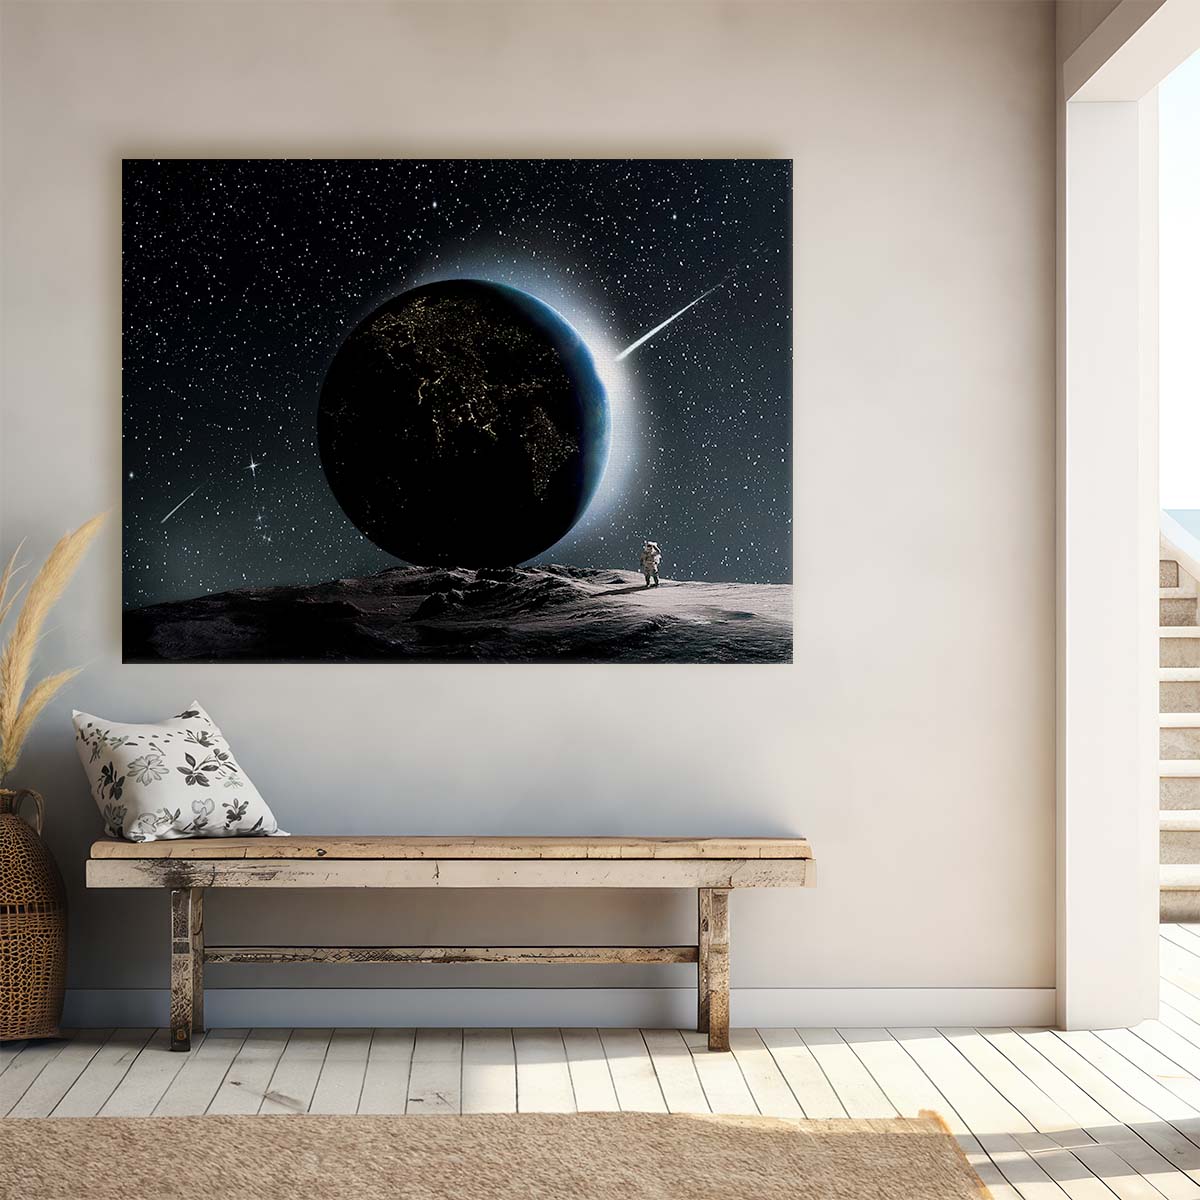 Galactic Dreams Astronaut & Earth Night Sky Wall Art by Luxuriance Designs. Made in USA.